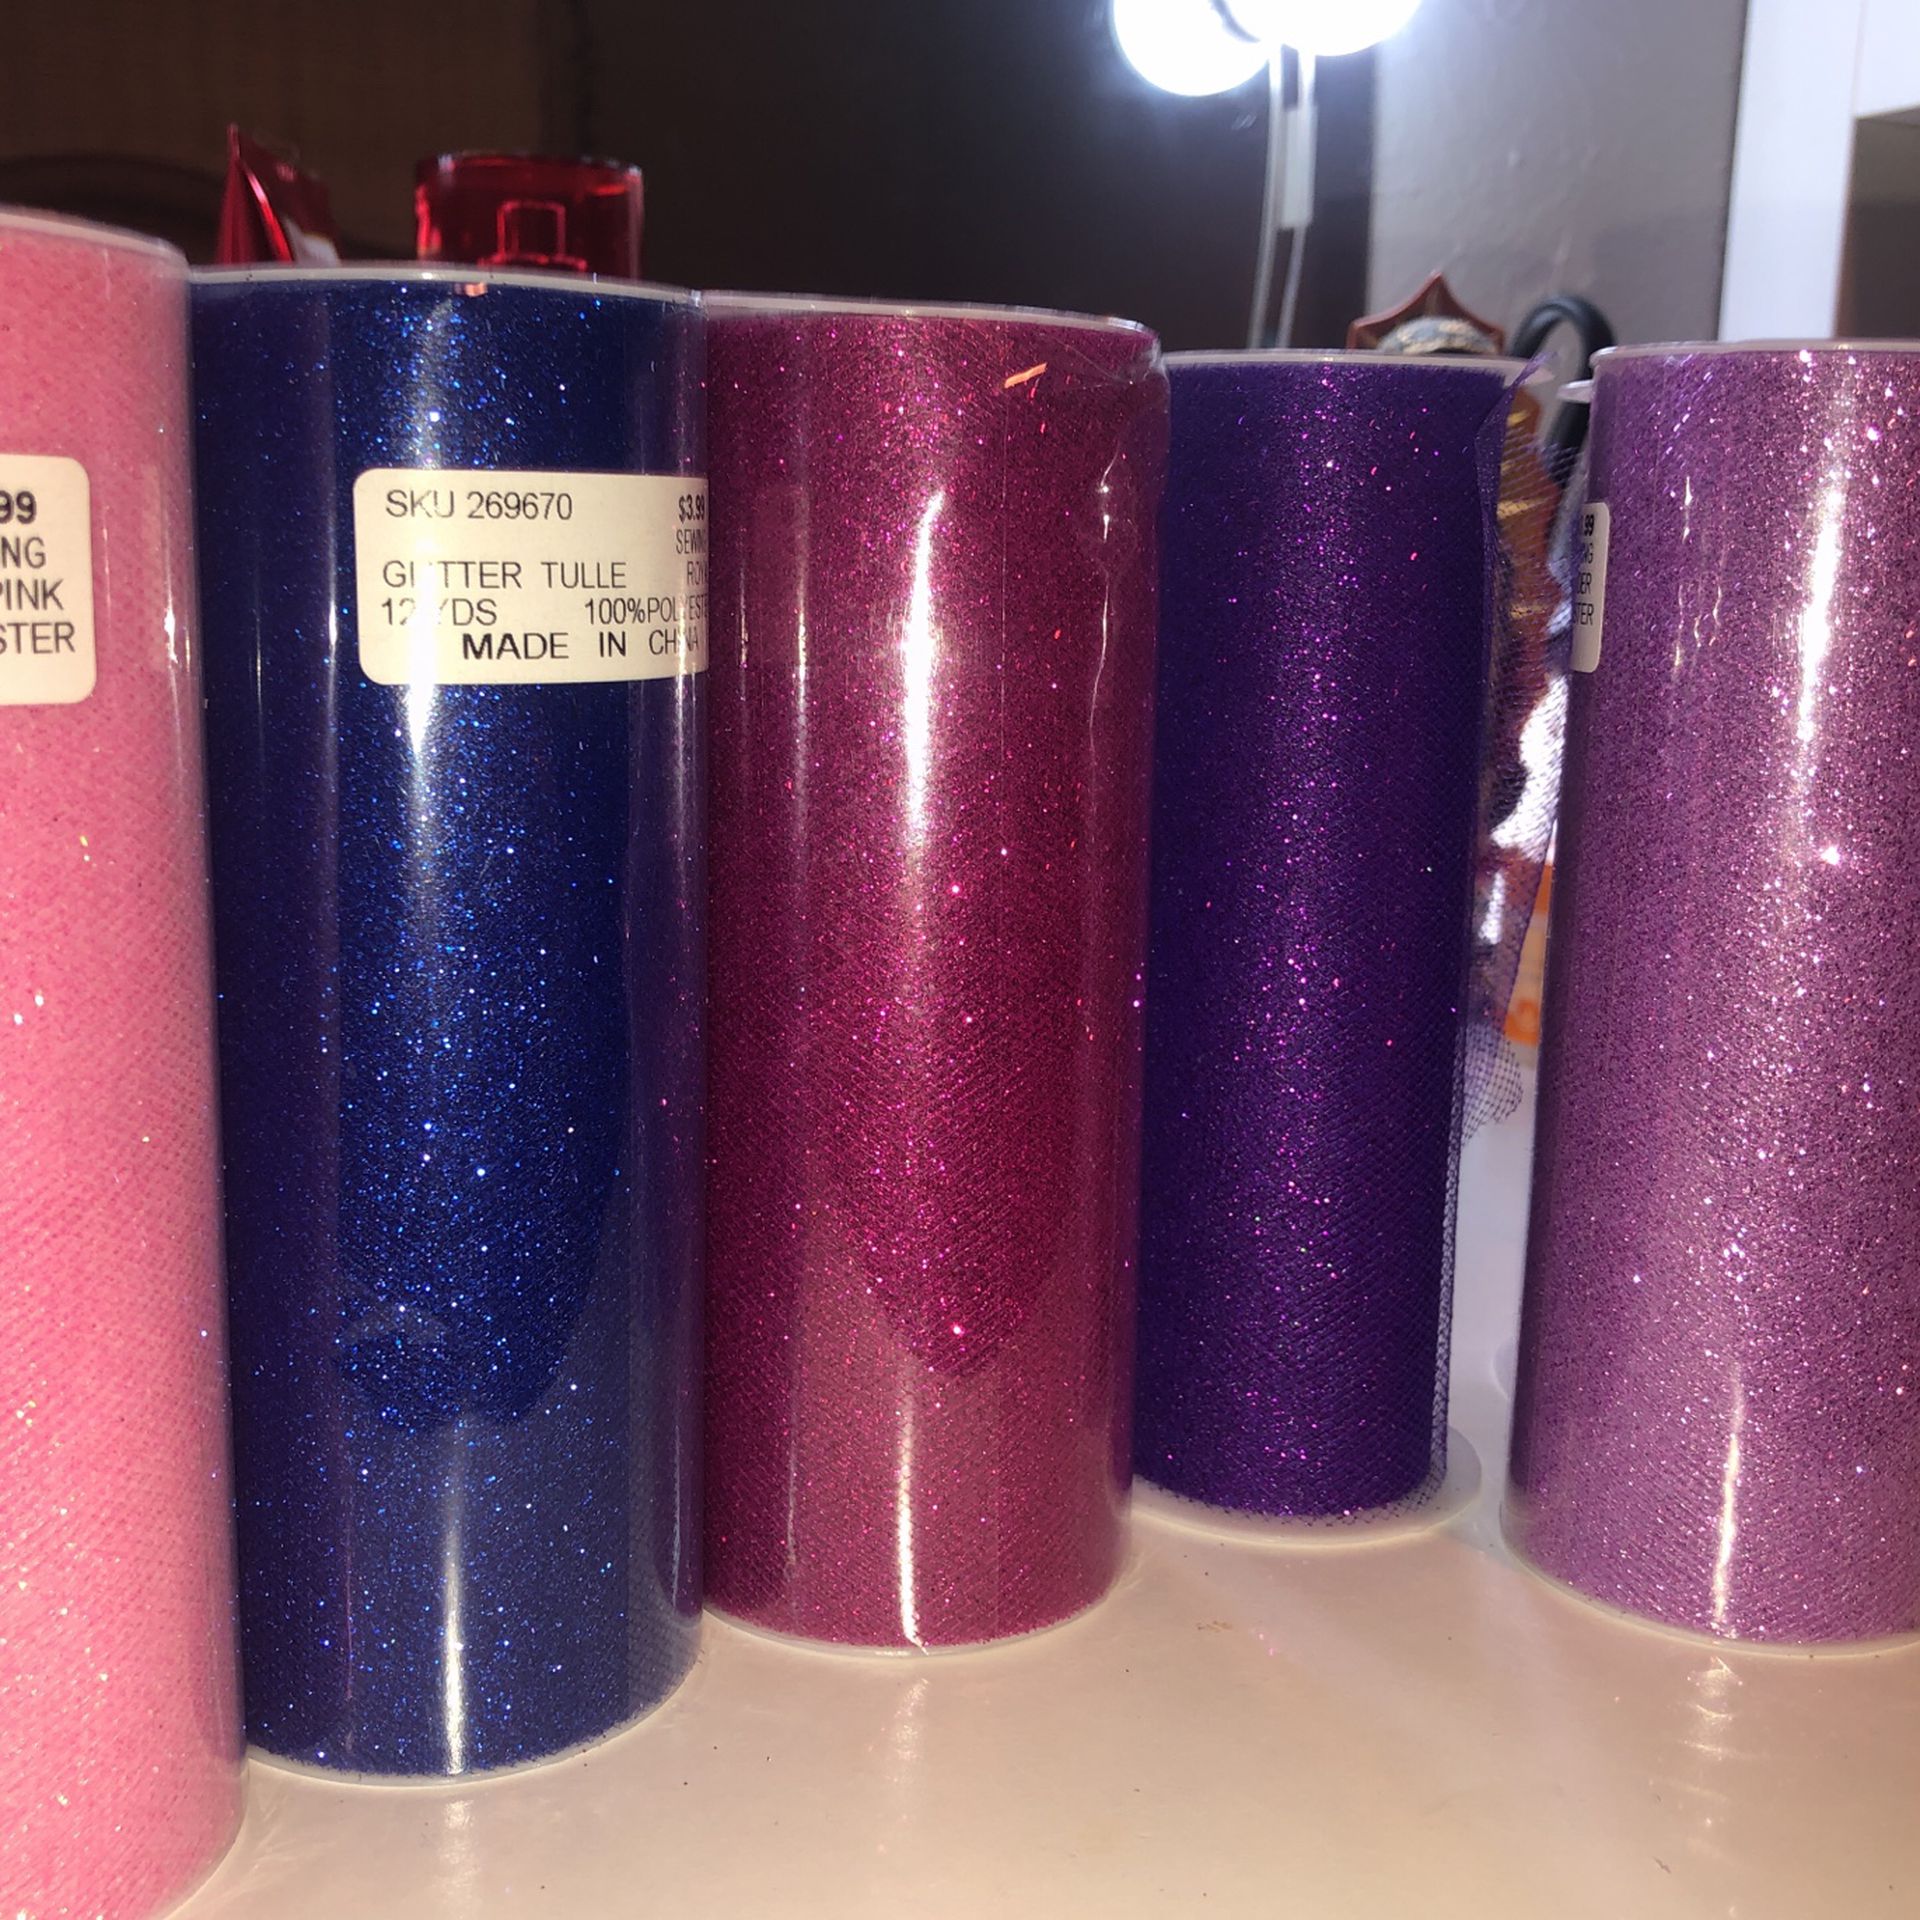 Sewing Glitter Tulle 100% Polyester